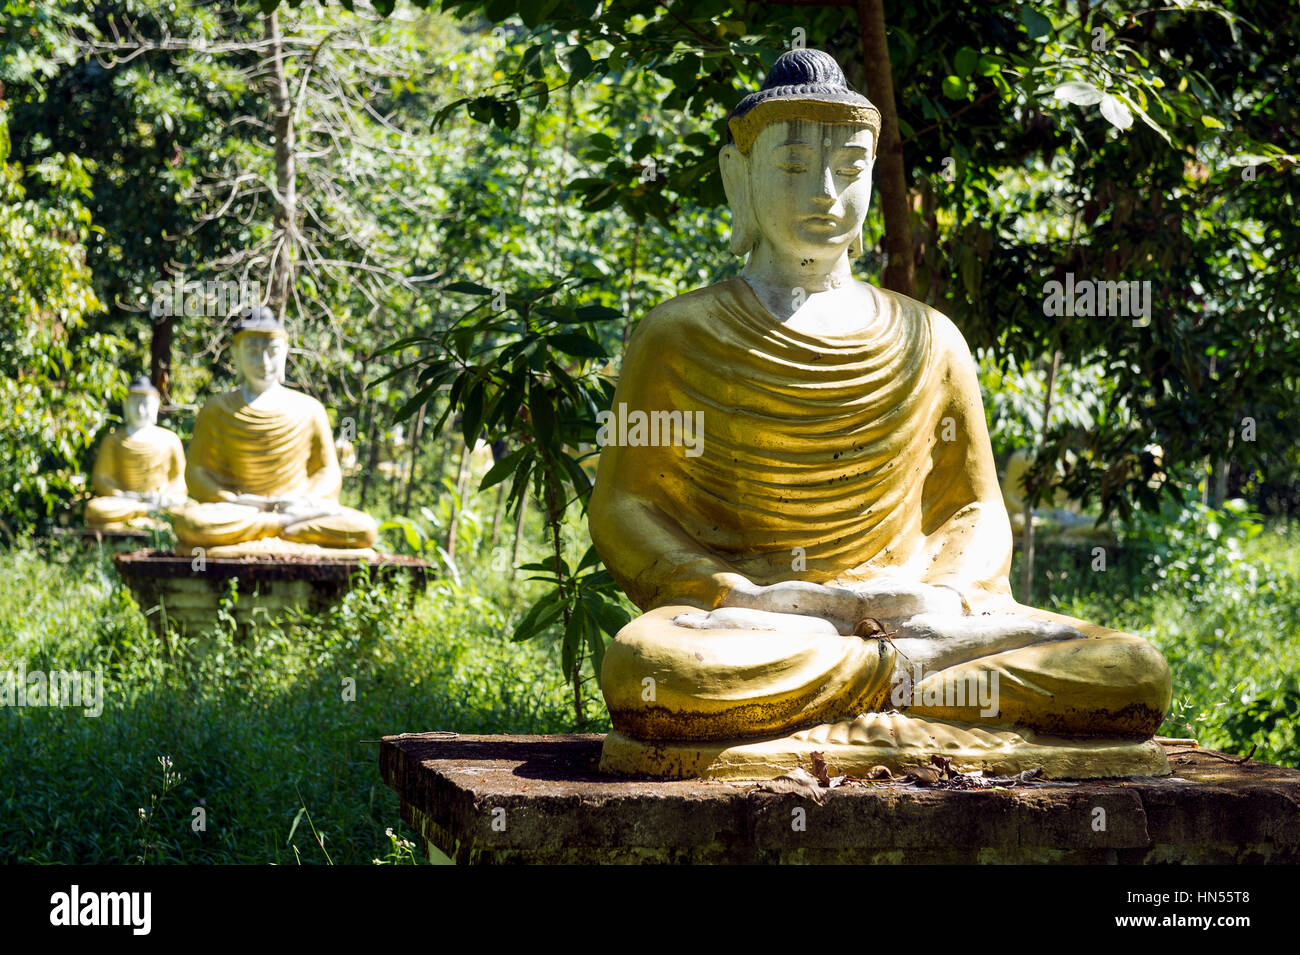 Explore The Birthplace Of Buddha With Our Private Lumbini Day Tour